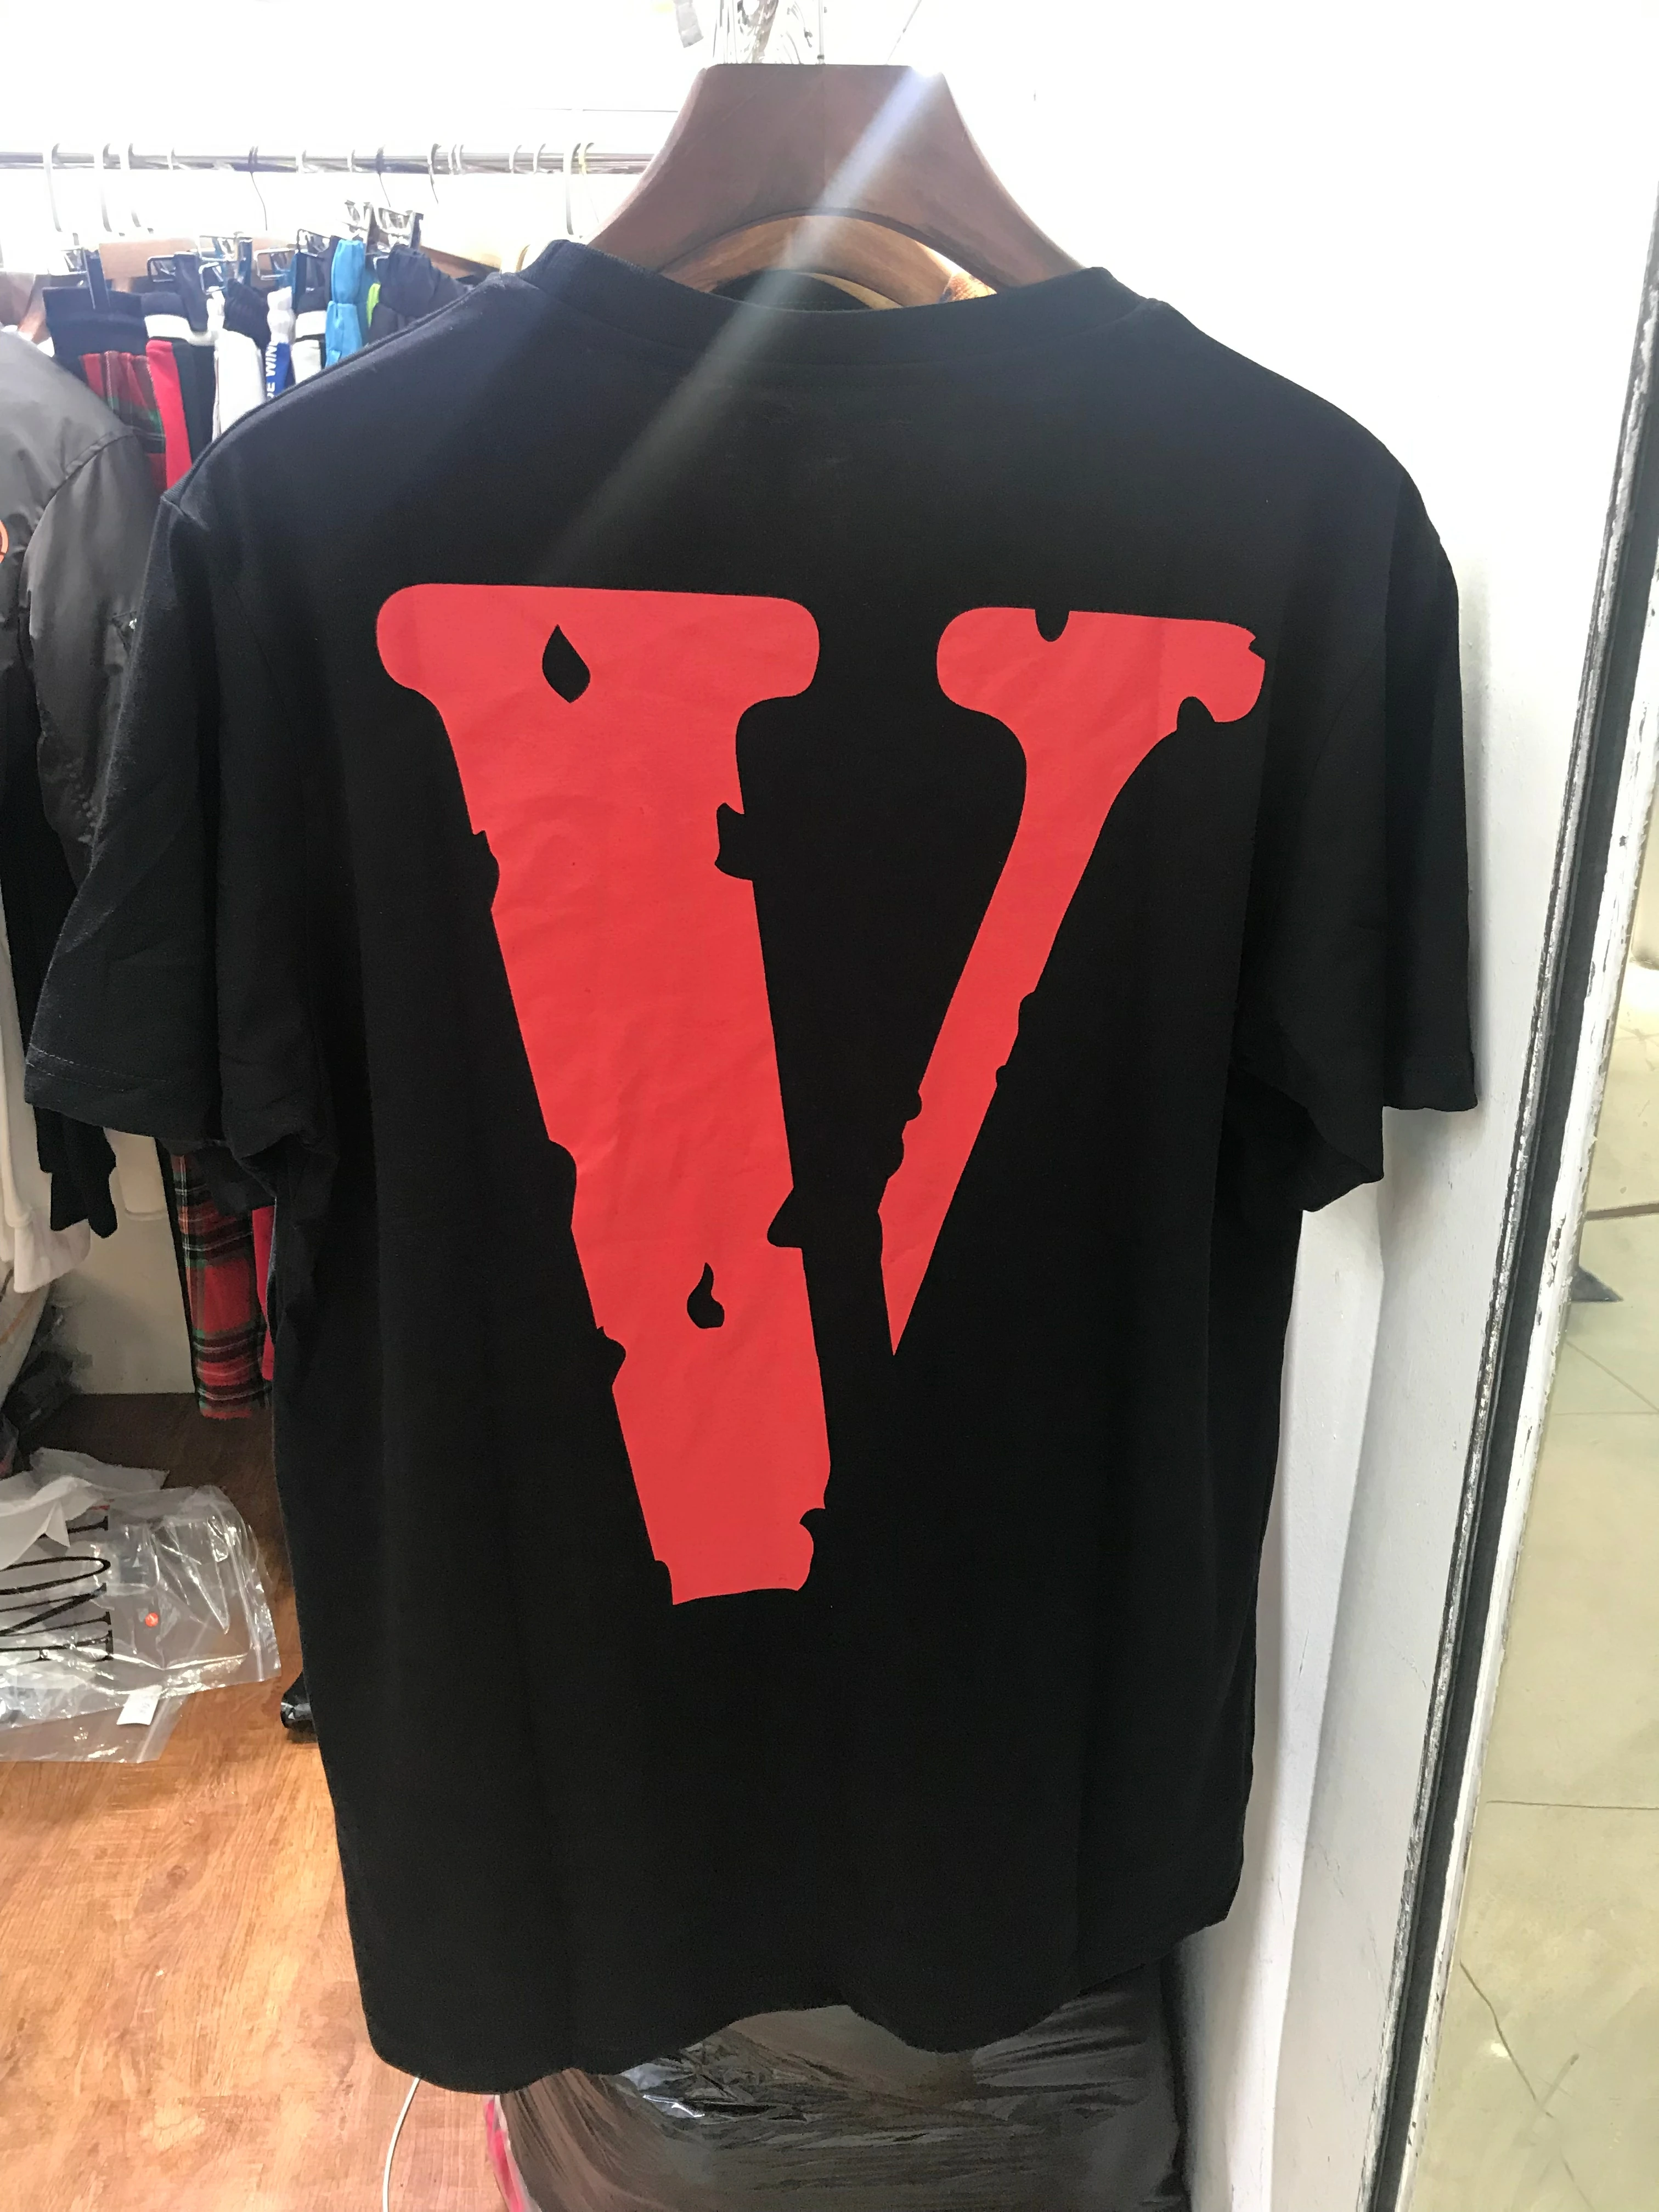 

VLONE Men's / Women's Couples Casual Fashion Trend High Street Loose 100% Cotton Reflective Letter V Round Neck T-Shirt 1232